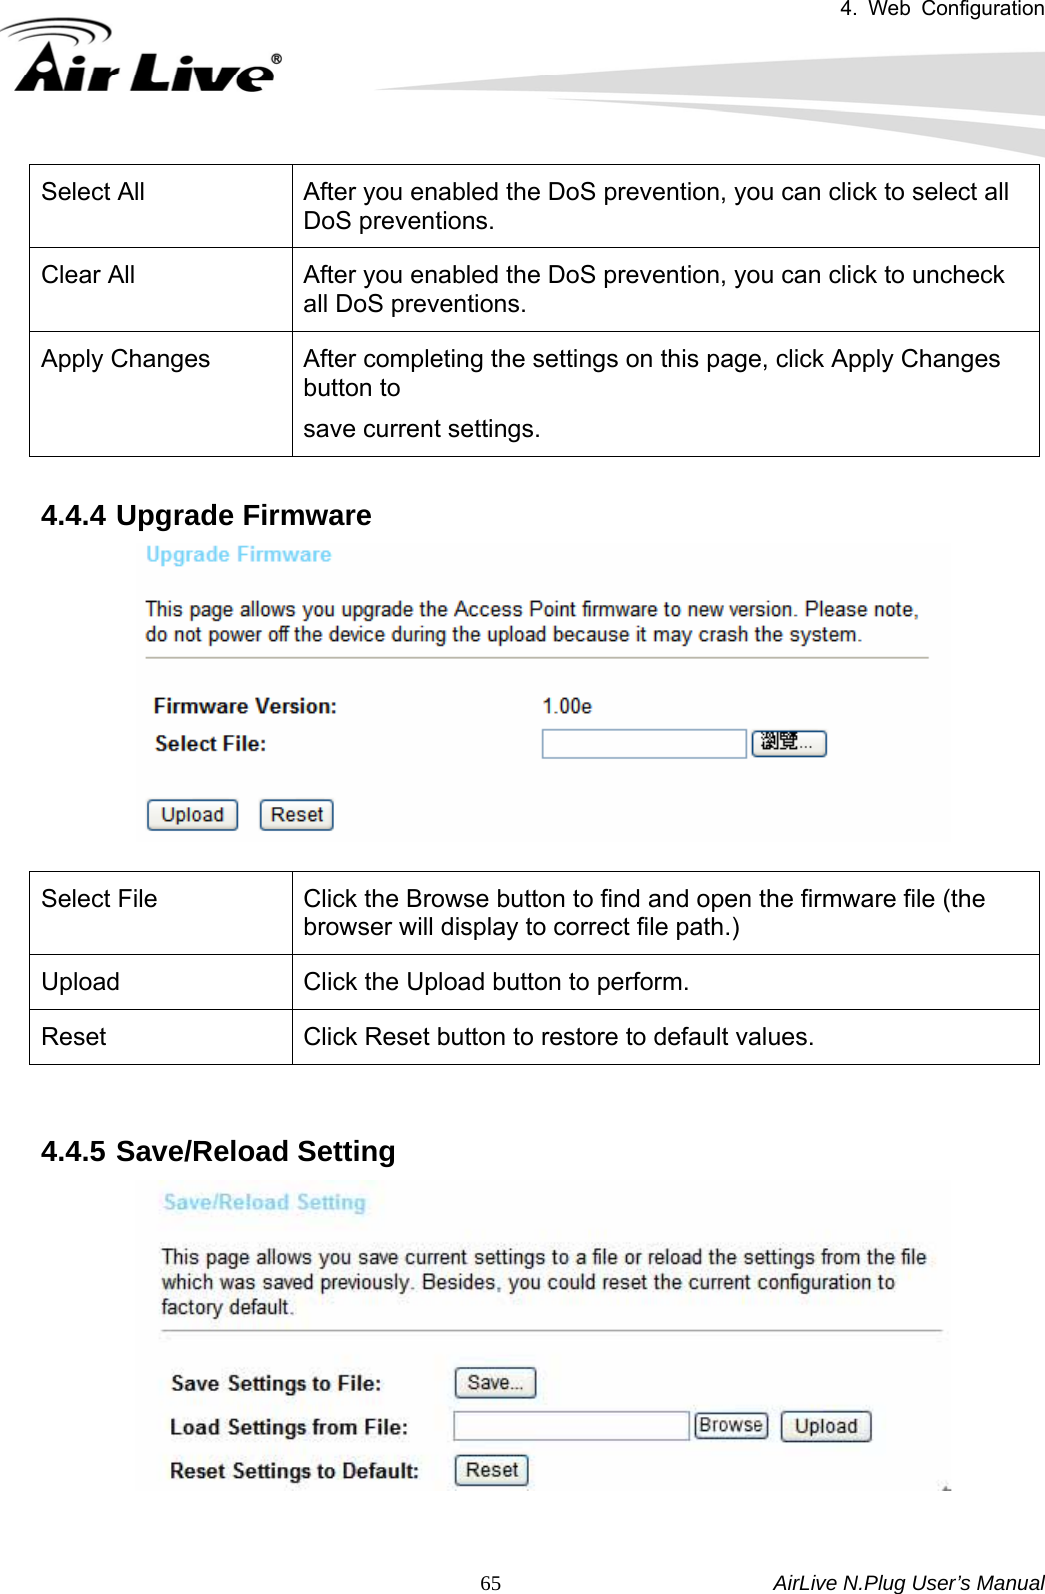 4. Web Configuration       AirLive N.Plug User’s Manual  65Select All  After you enabled the DoS prevention, you can click to select all DoS preventions. Clear All  After you enabled the DoS prevention, you can click to uncheck all DoS preventions. Apply Changes  After completing the settings on this page, click Apply Changes button to   save current settings.  4.4.4 Upgrade Firmware   Select File      Click the Browse button to find and open the firmware file (the browser will display to correct file path.) Upload  Click the Upload button to perform. Reset  Click Reset button to restore to default values.   4.4.5 Save/Reload Setting   